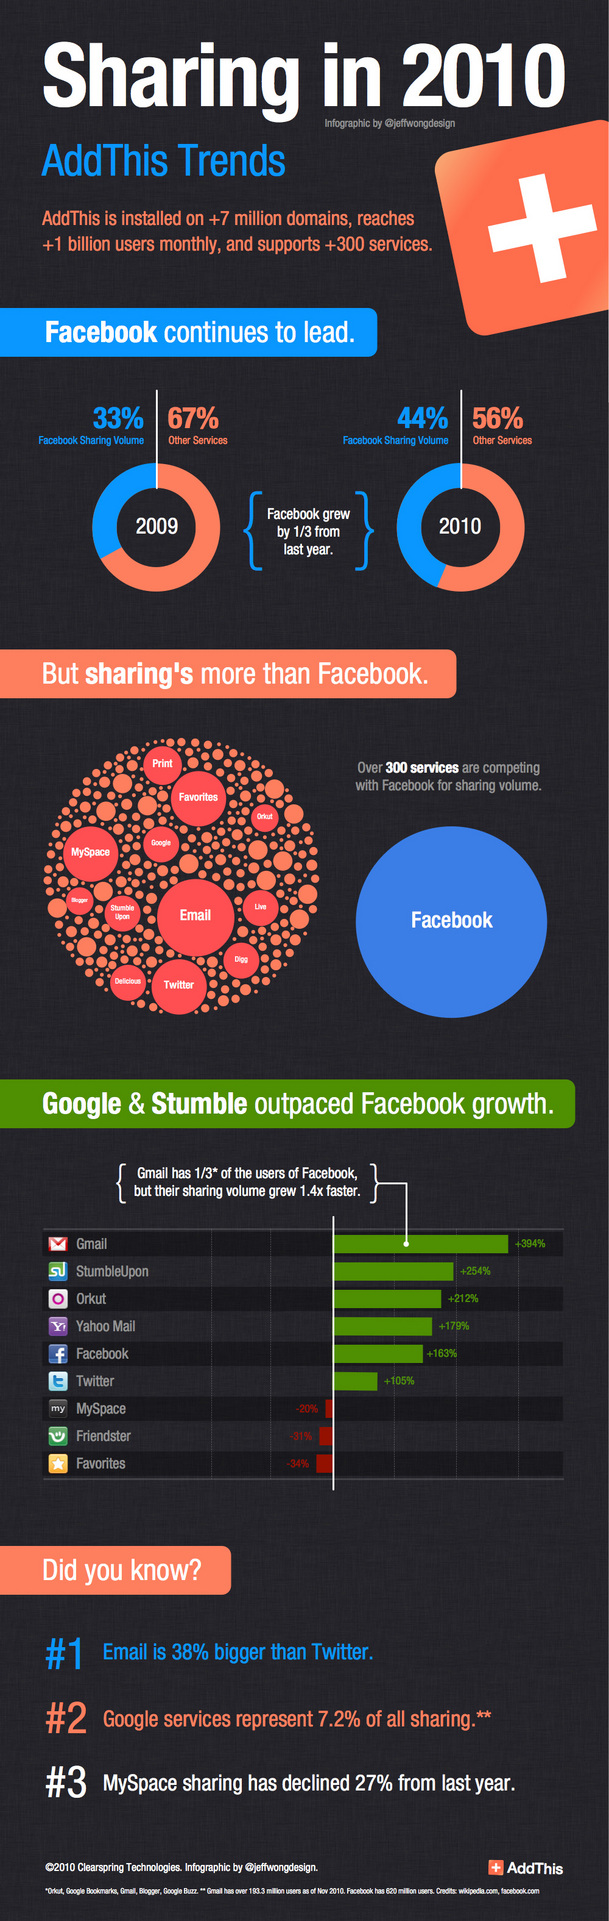 Infographic on sharing by Addthis